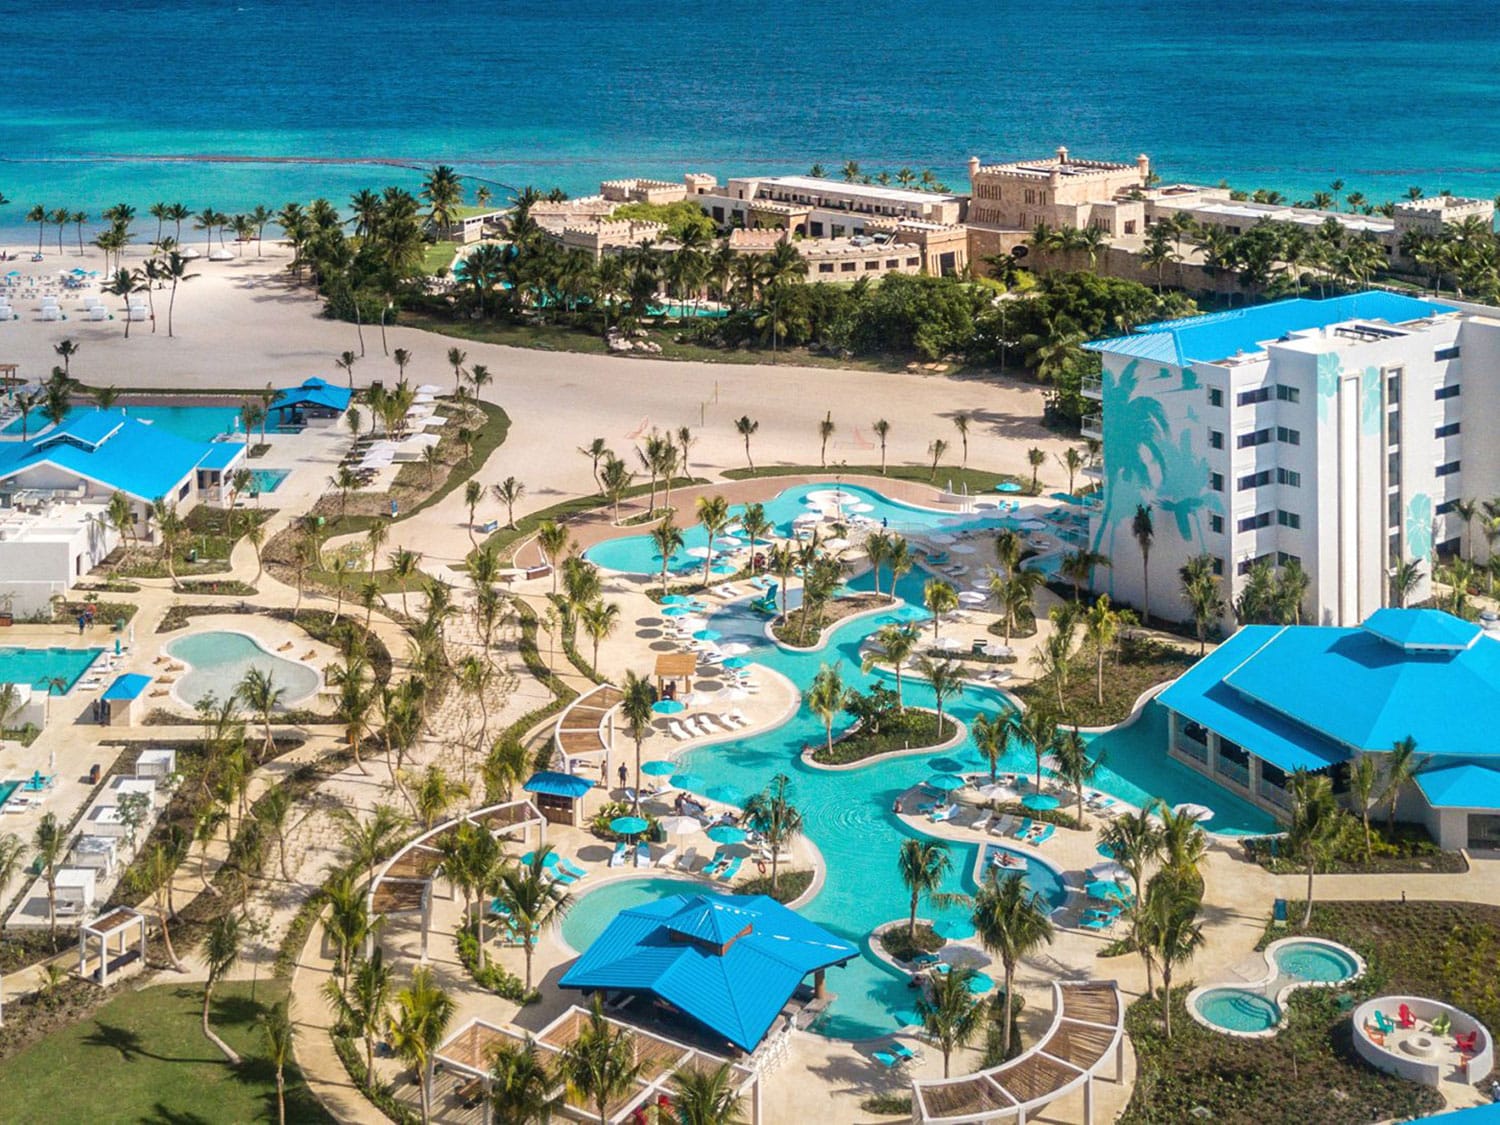 An aerial view of the property and pools at Margaritaville Island Reserve Cap Cana in the Dominican Republic.